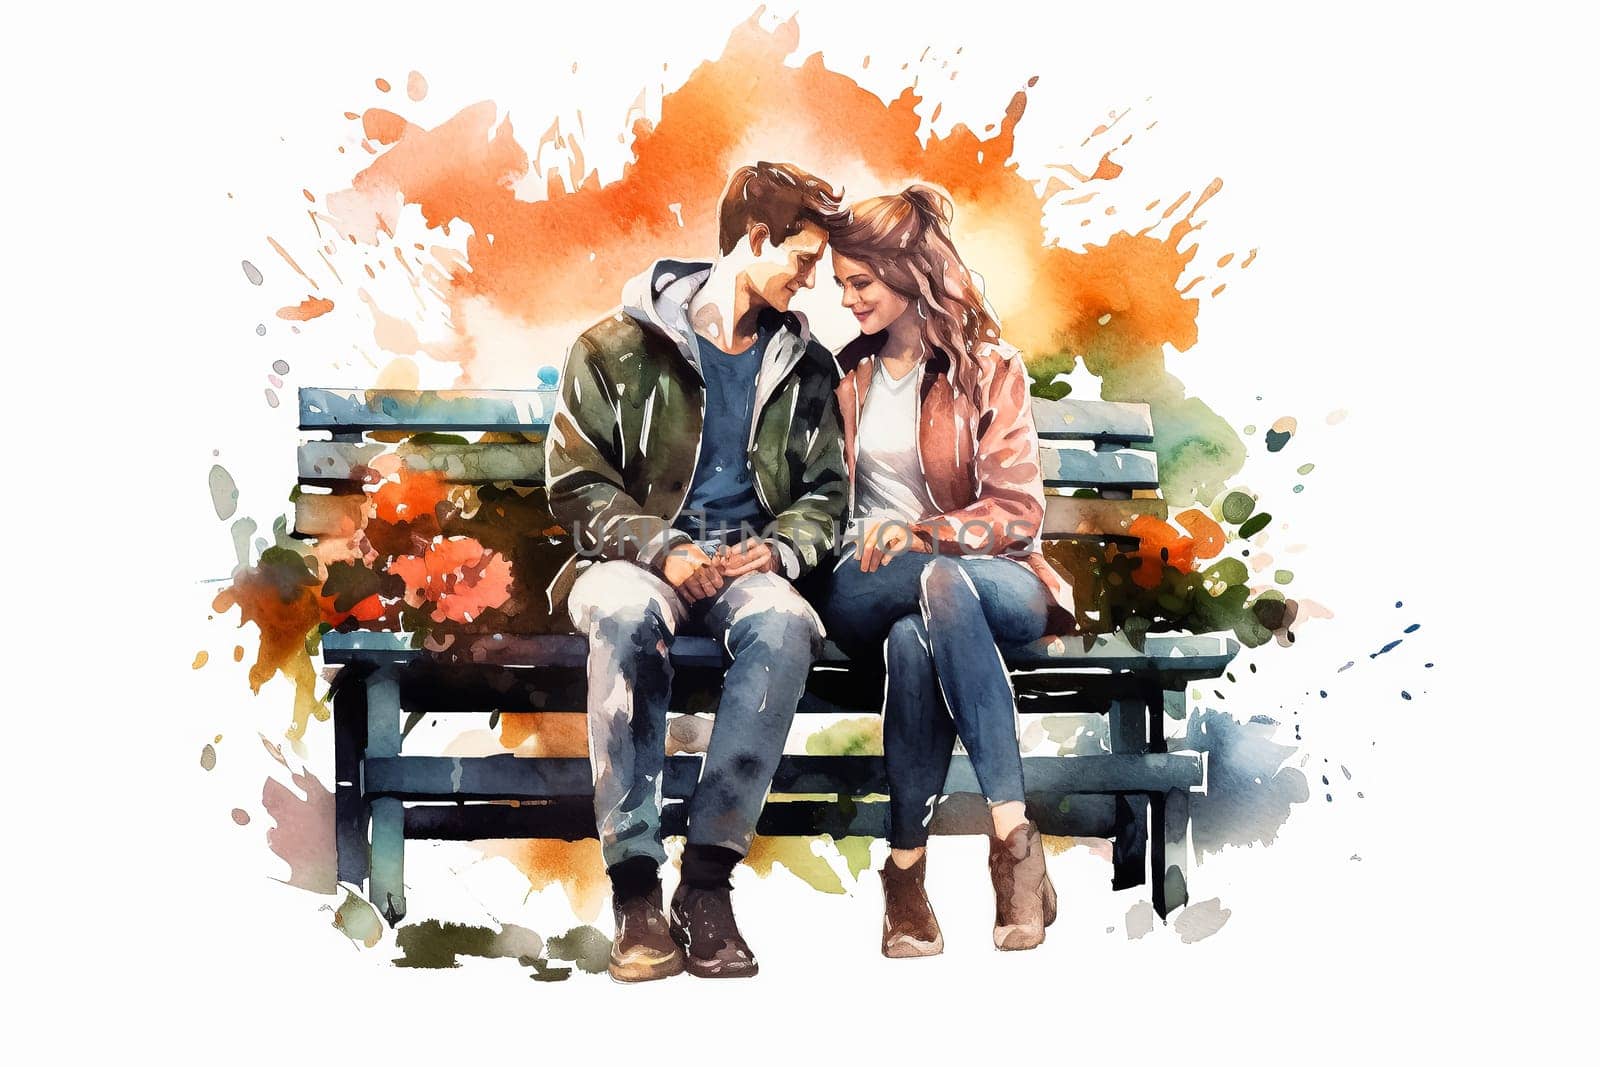 Experience the tranquility of love with a watercolor illustration capturing a couple in a tender moment, sitting on a bench. A picturesque and romantic date.